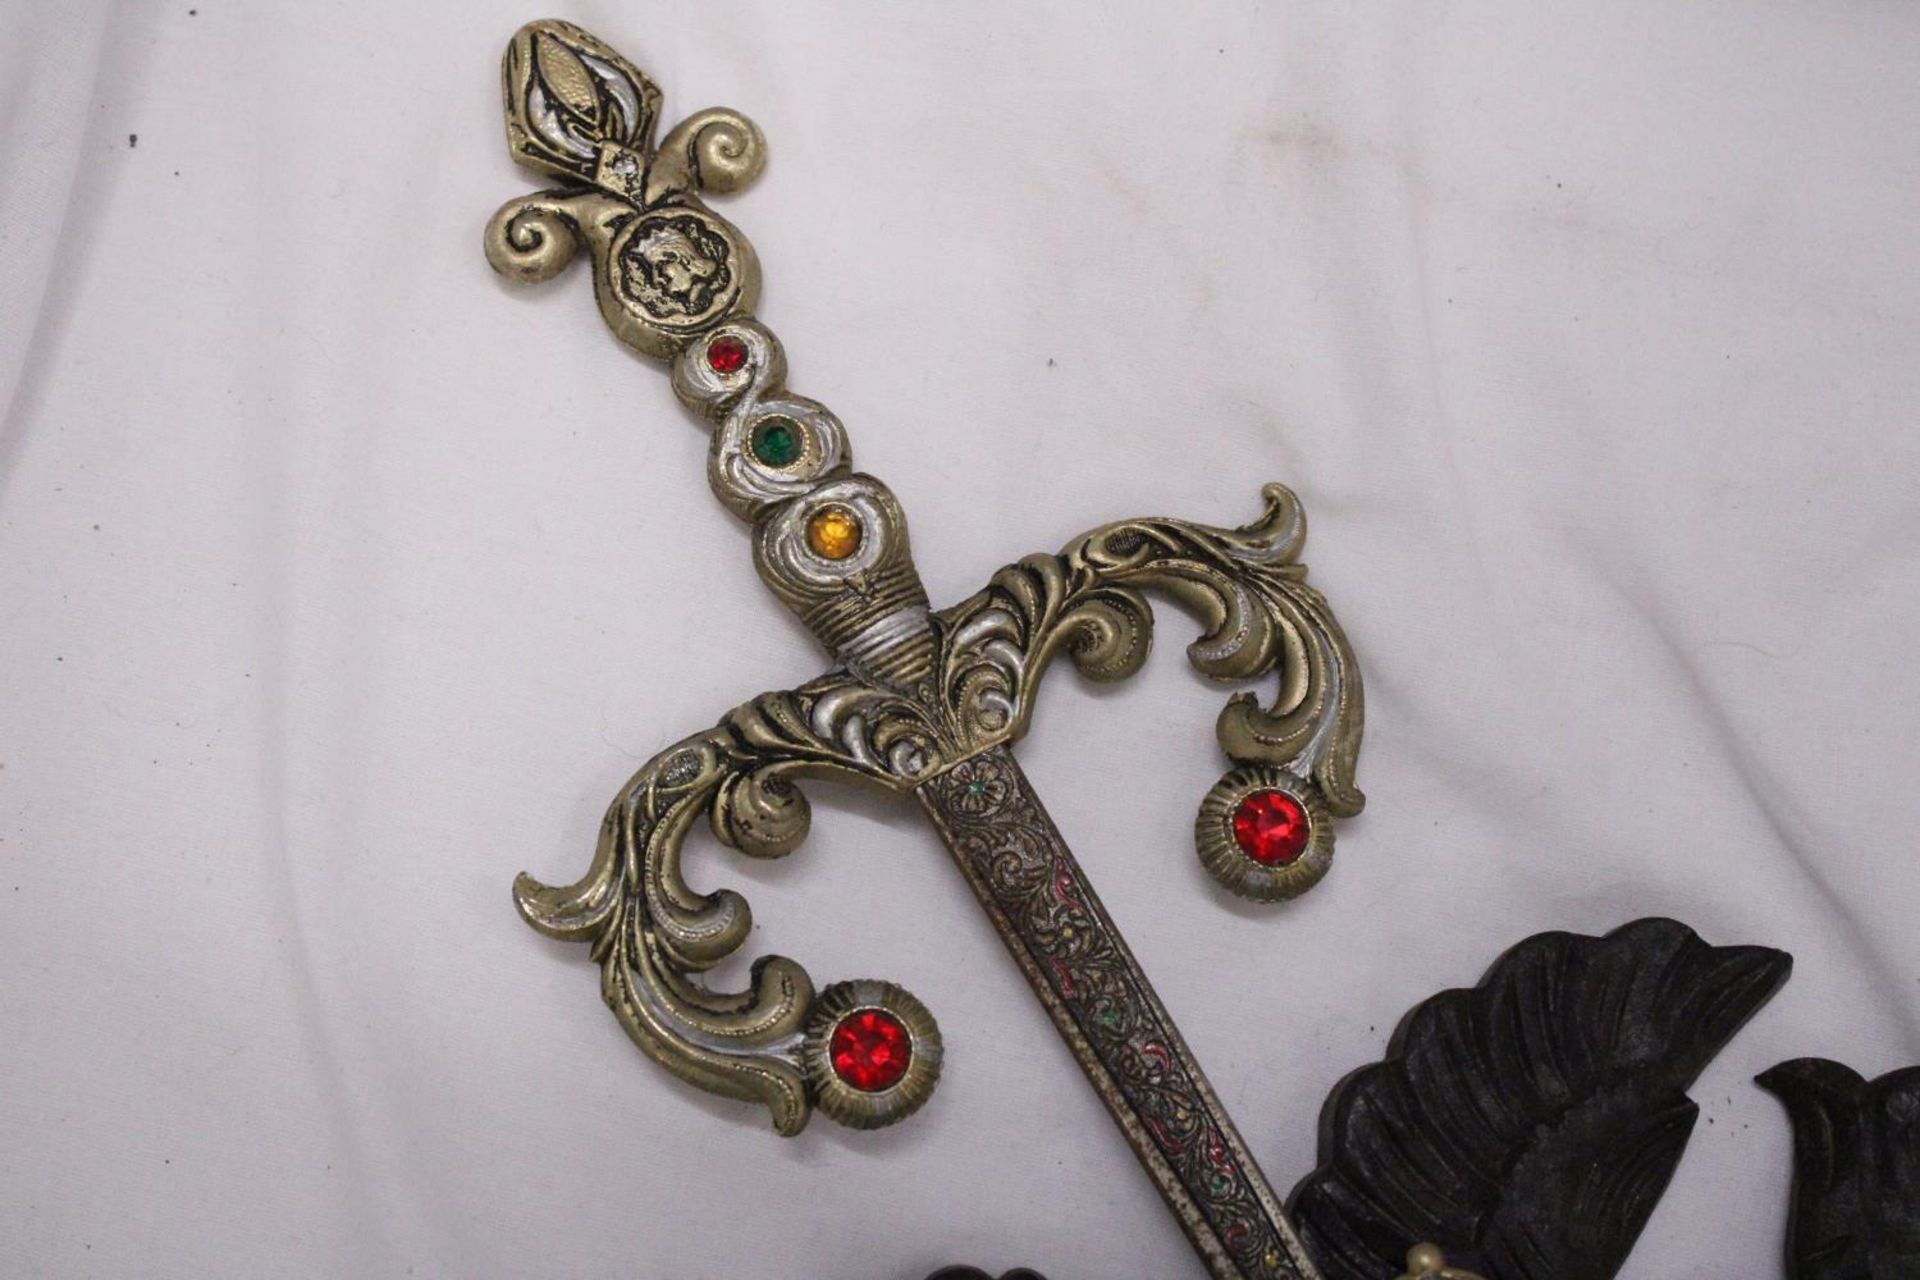 TWO VINTAGE SWORDS ON A CRESTED PLAQUE - Image 4 of 6